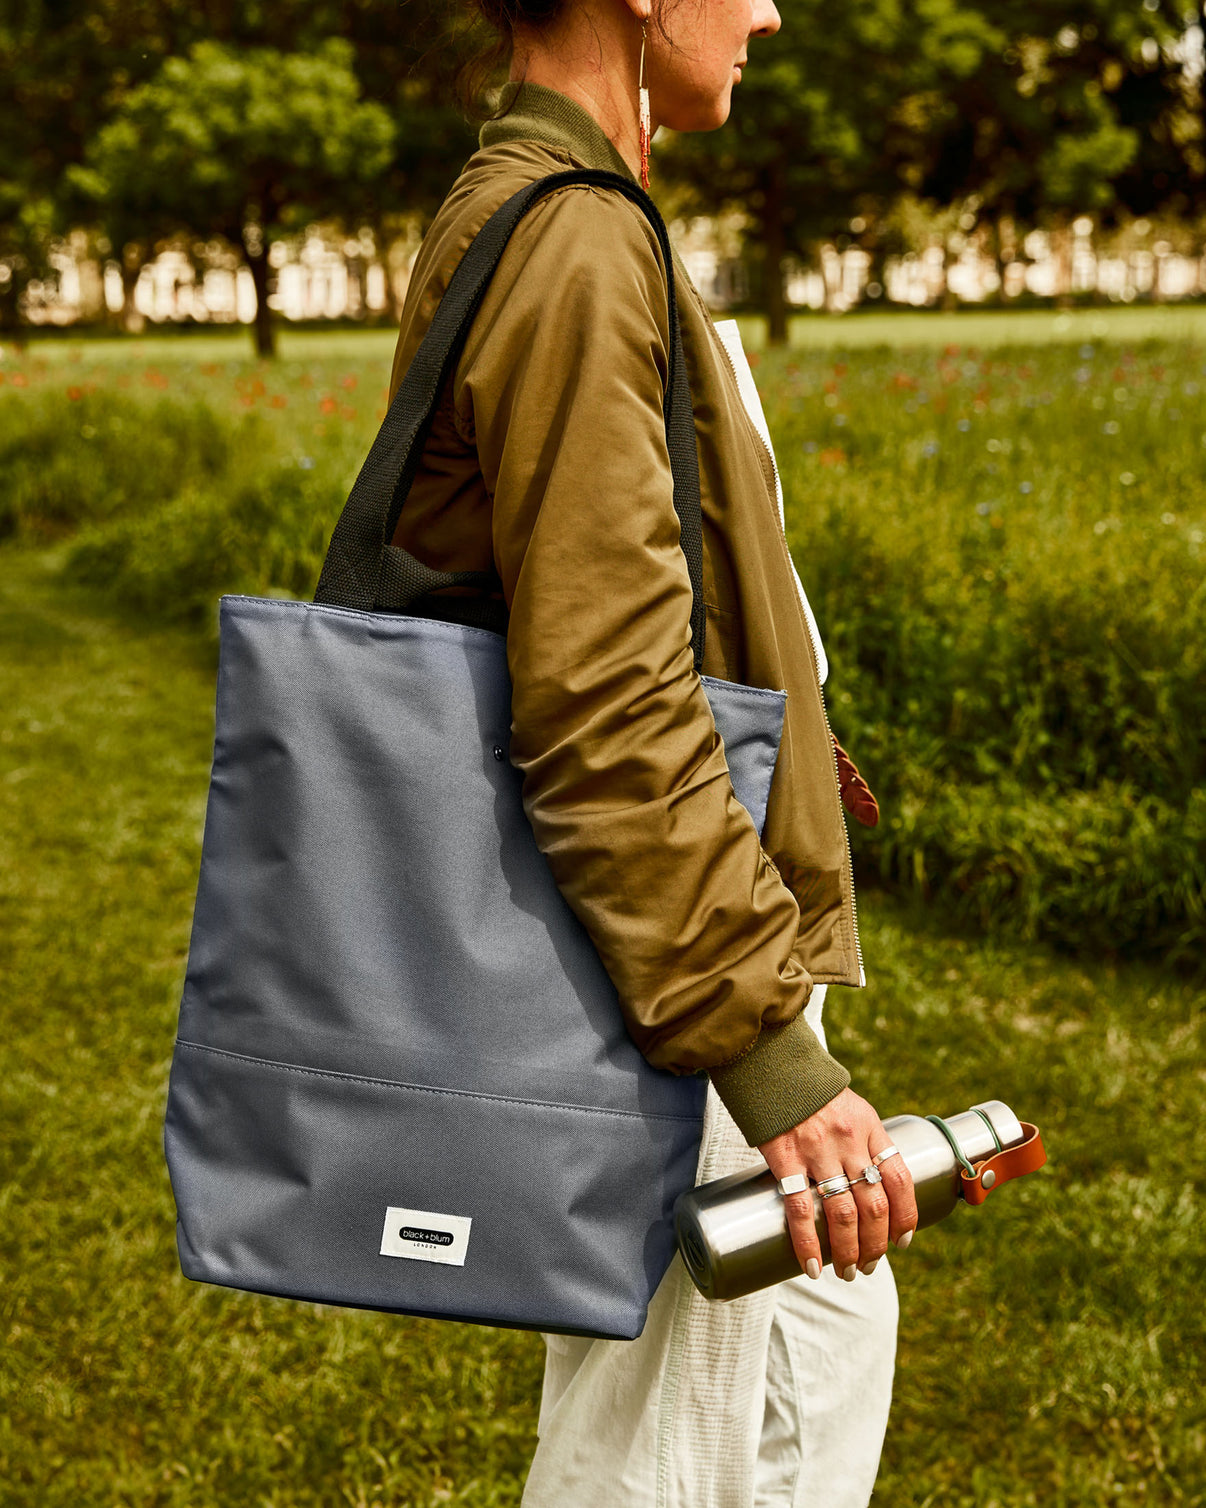 Sustainable Grocery Cooler Bag, Insulated Eco-Friendly Washable